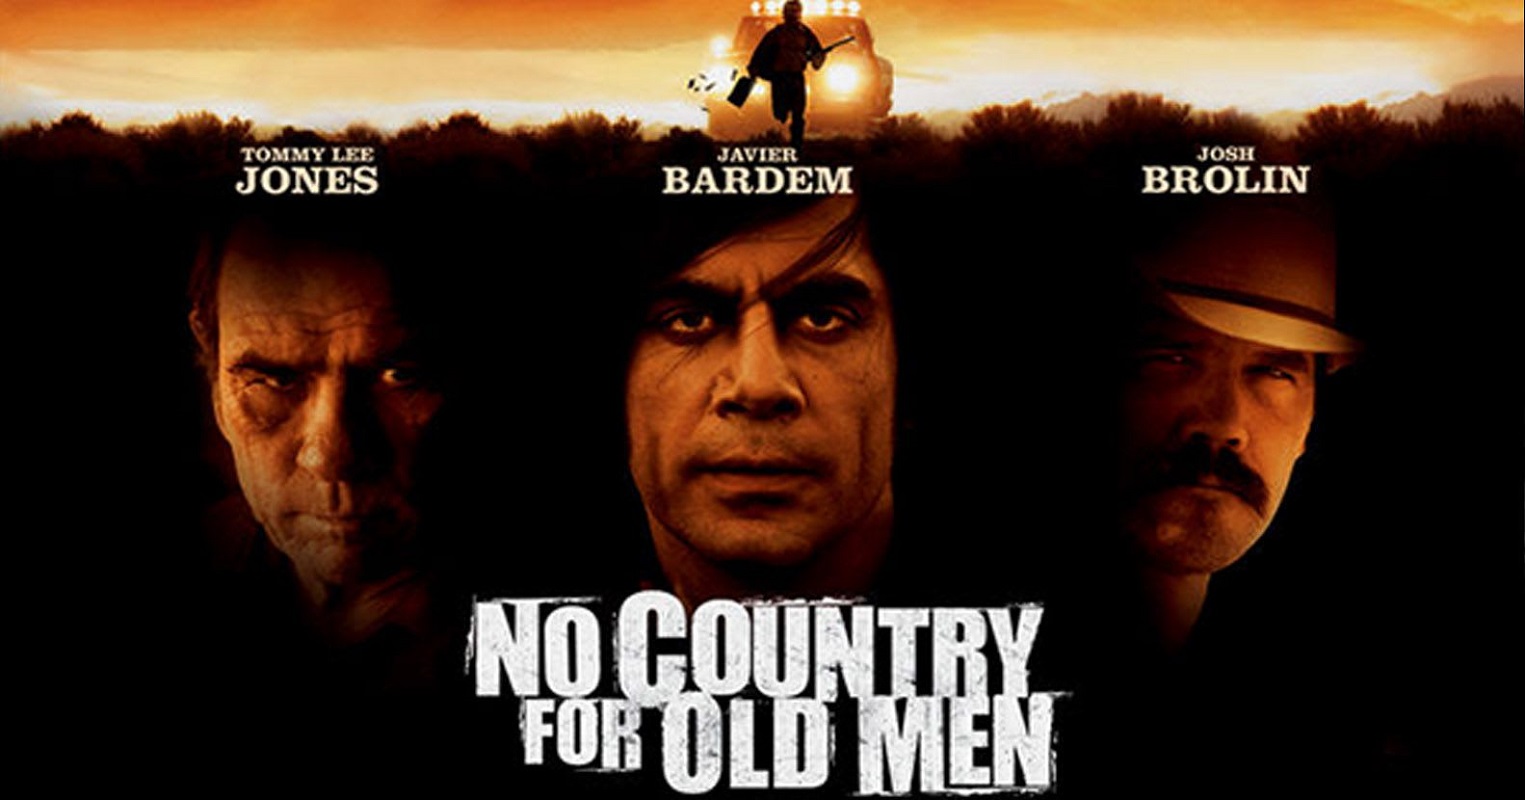 Име:  no country for old men.jpg
Разглеждания: 87
Размер:  169,6 КБ